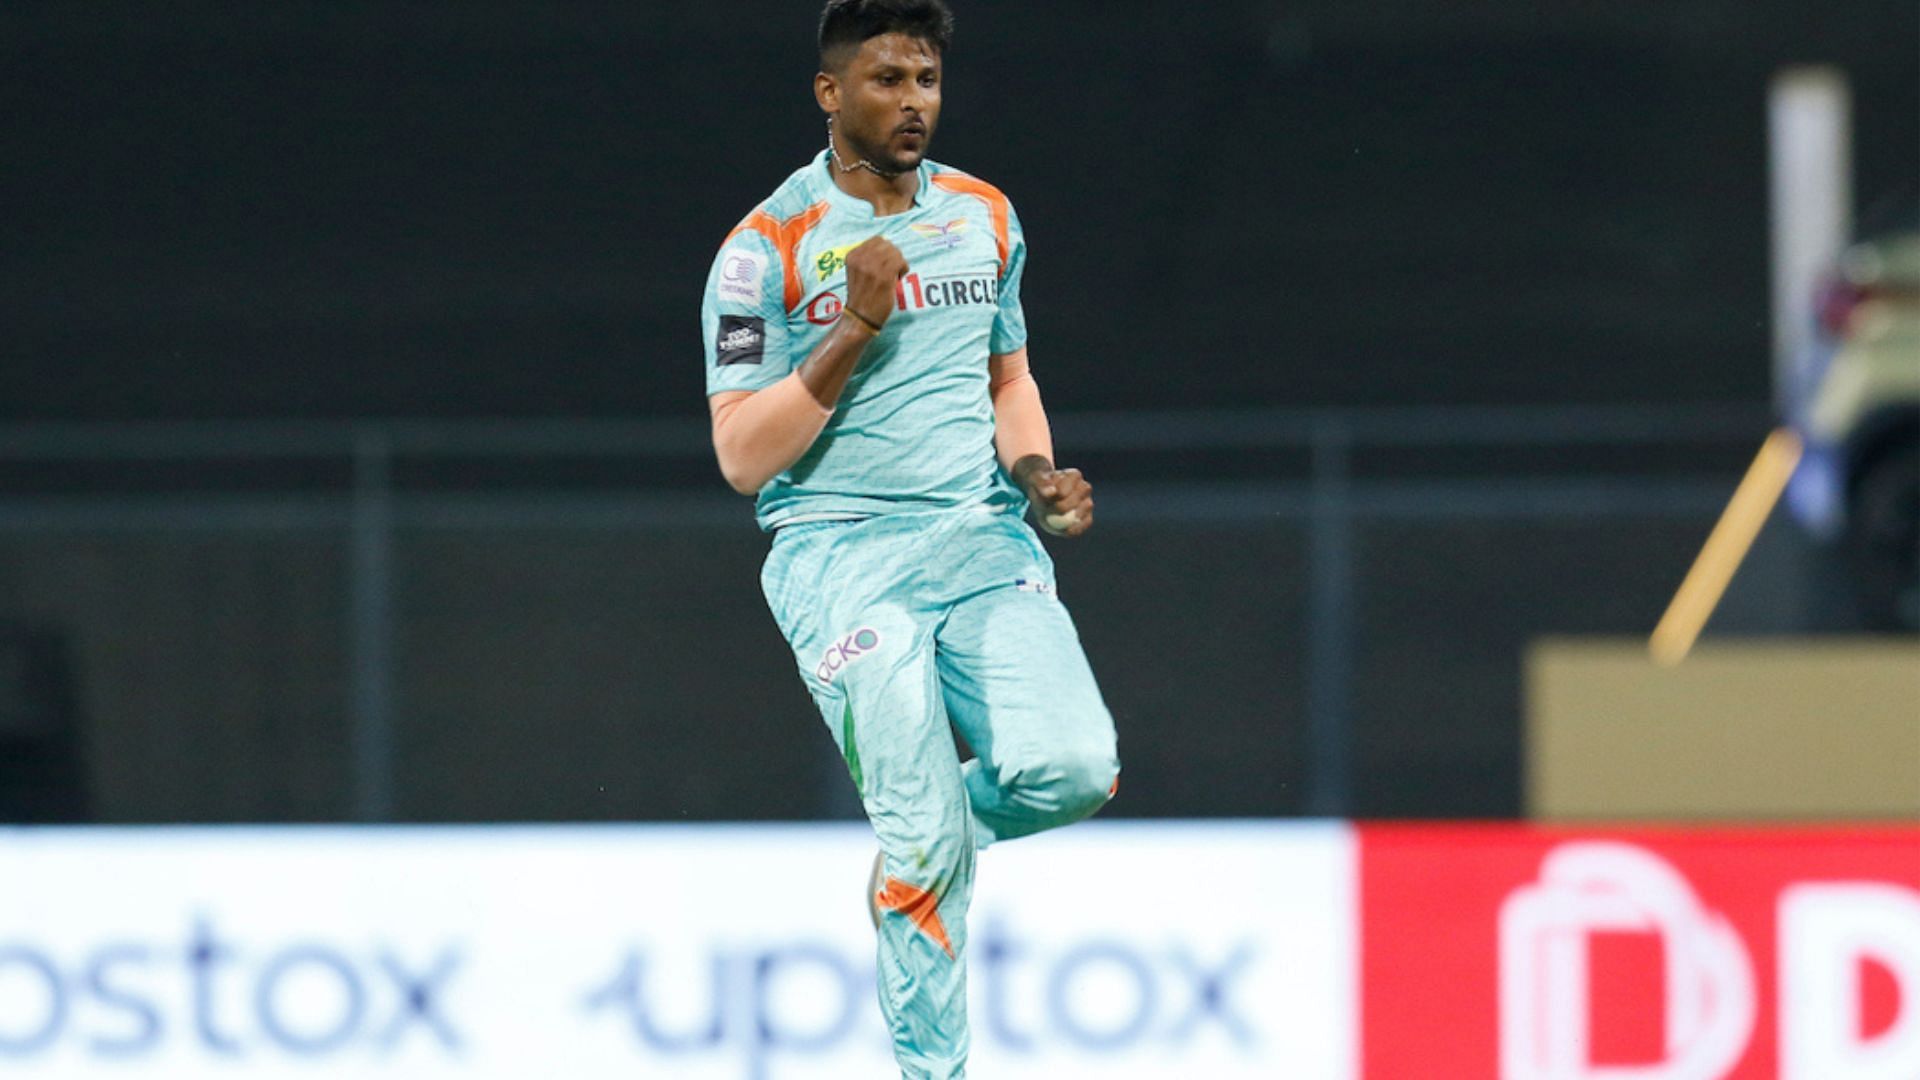 Krishnappa Gowtham was snapped up by LSG ahead of the 2022 season.